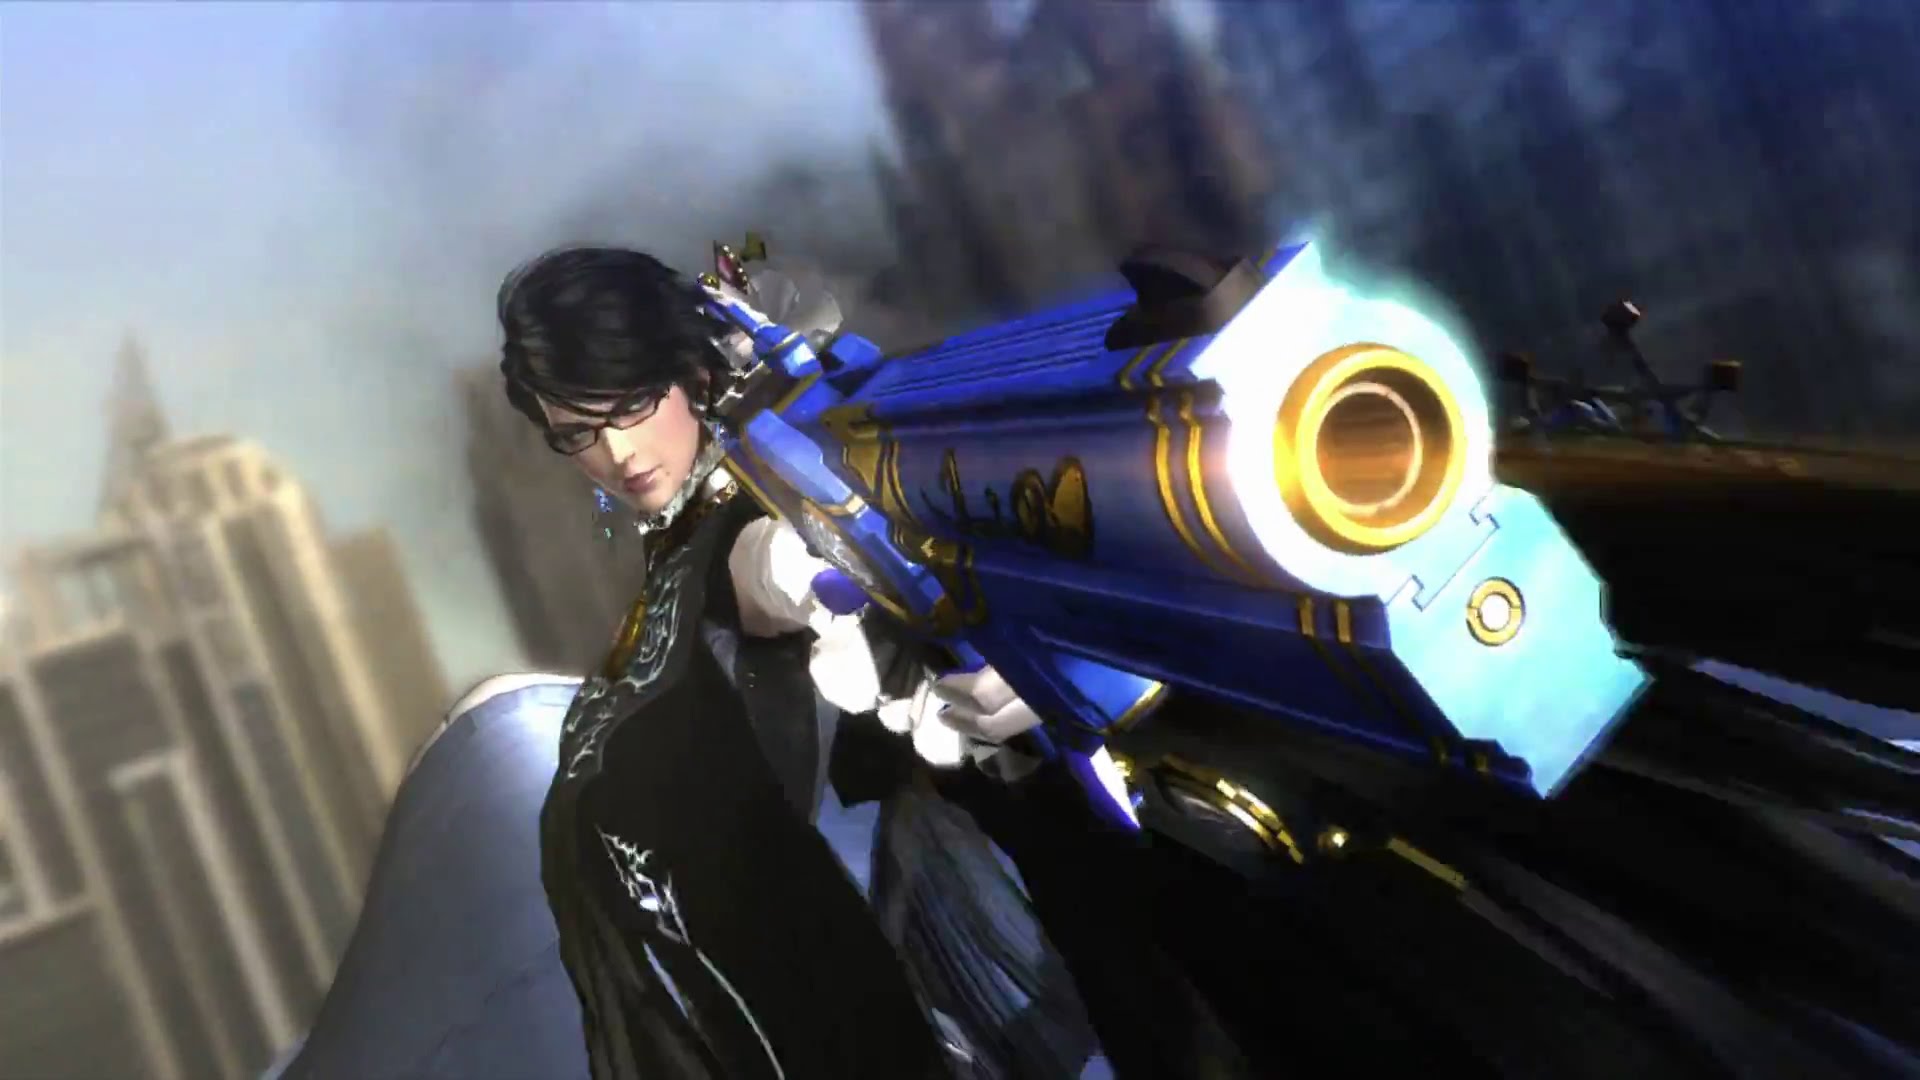 Bayonetta 2 Wallpapers Video Game Hq Bayonetta 2 Pictures 4k Images, Photos, Reviews